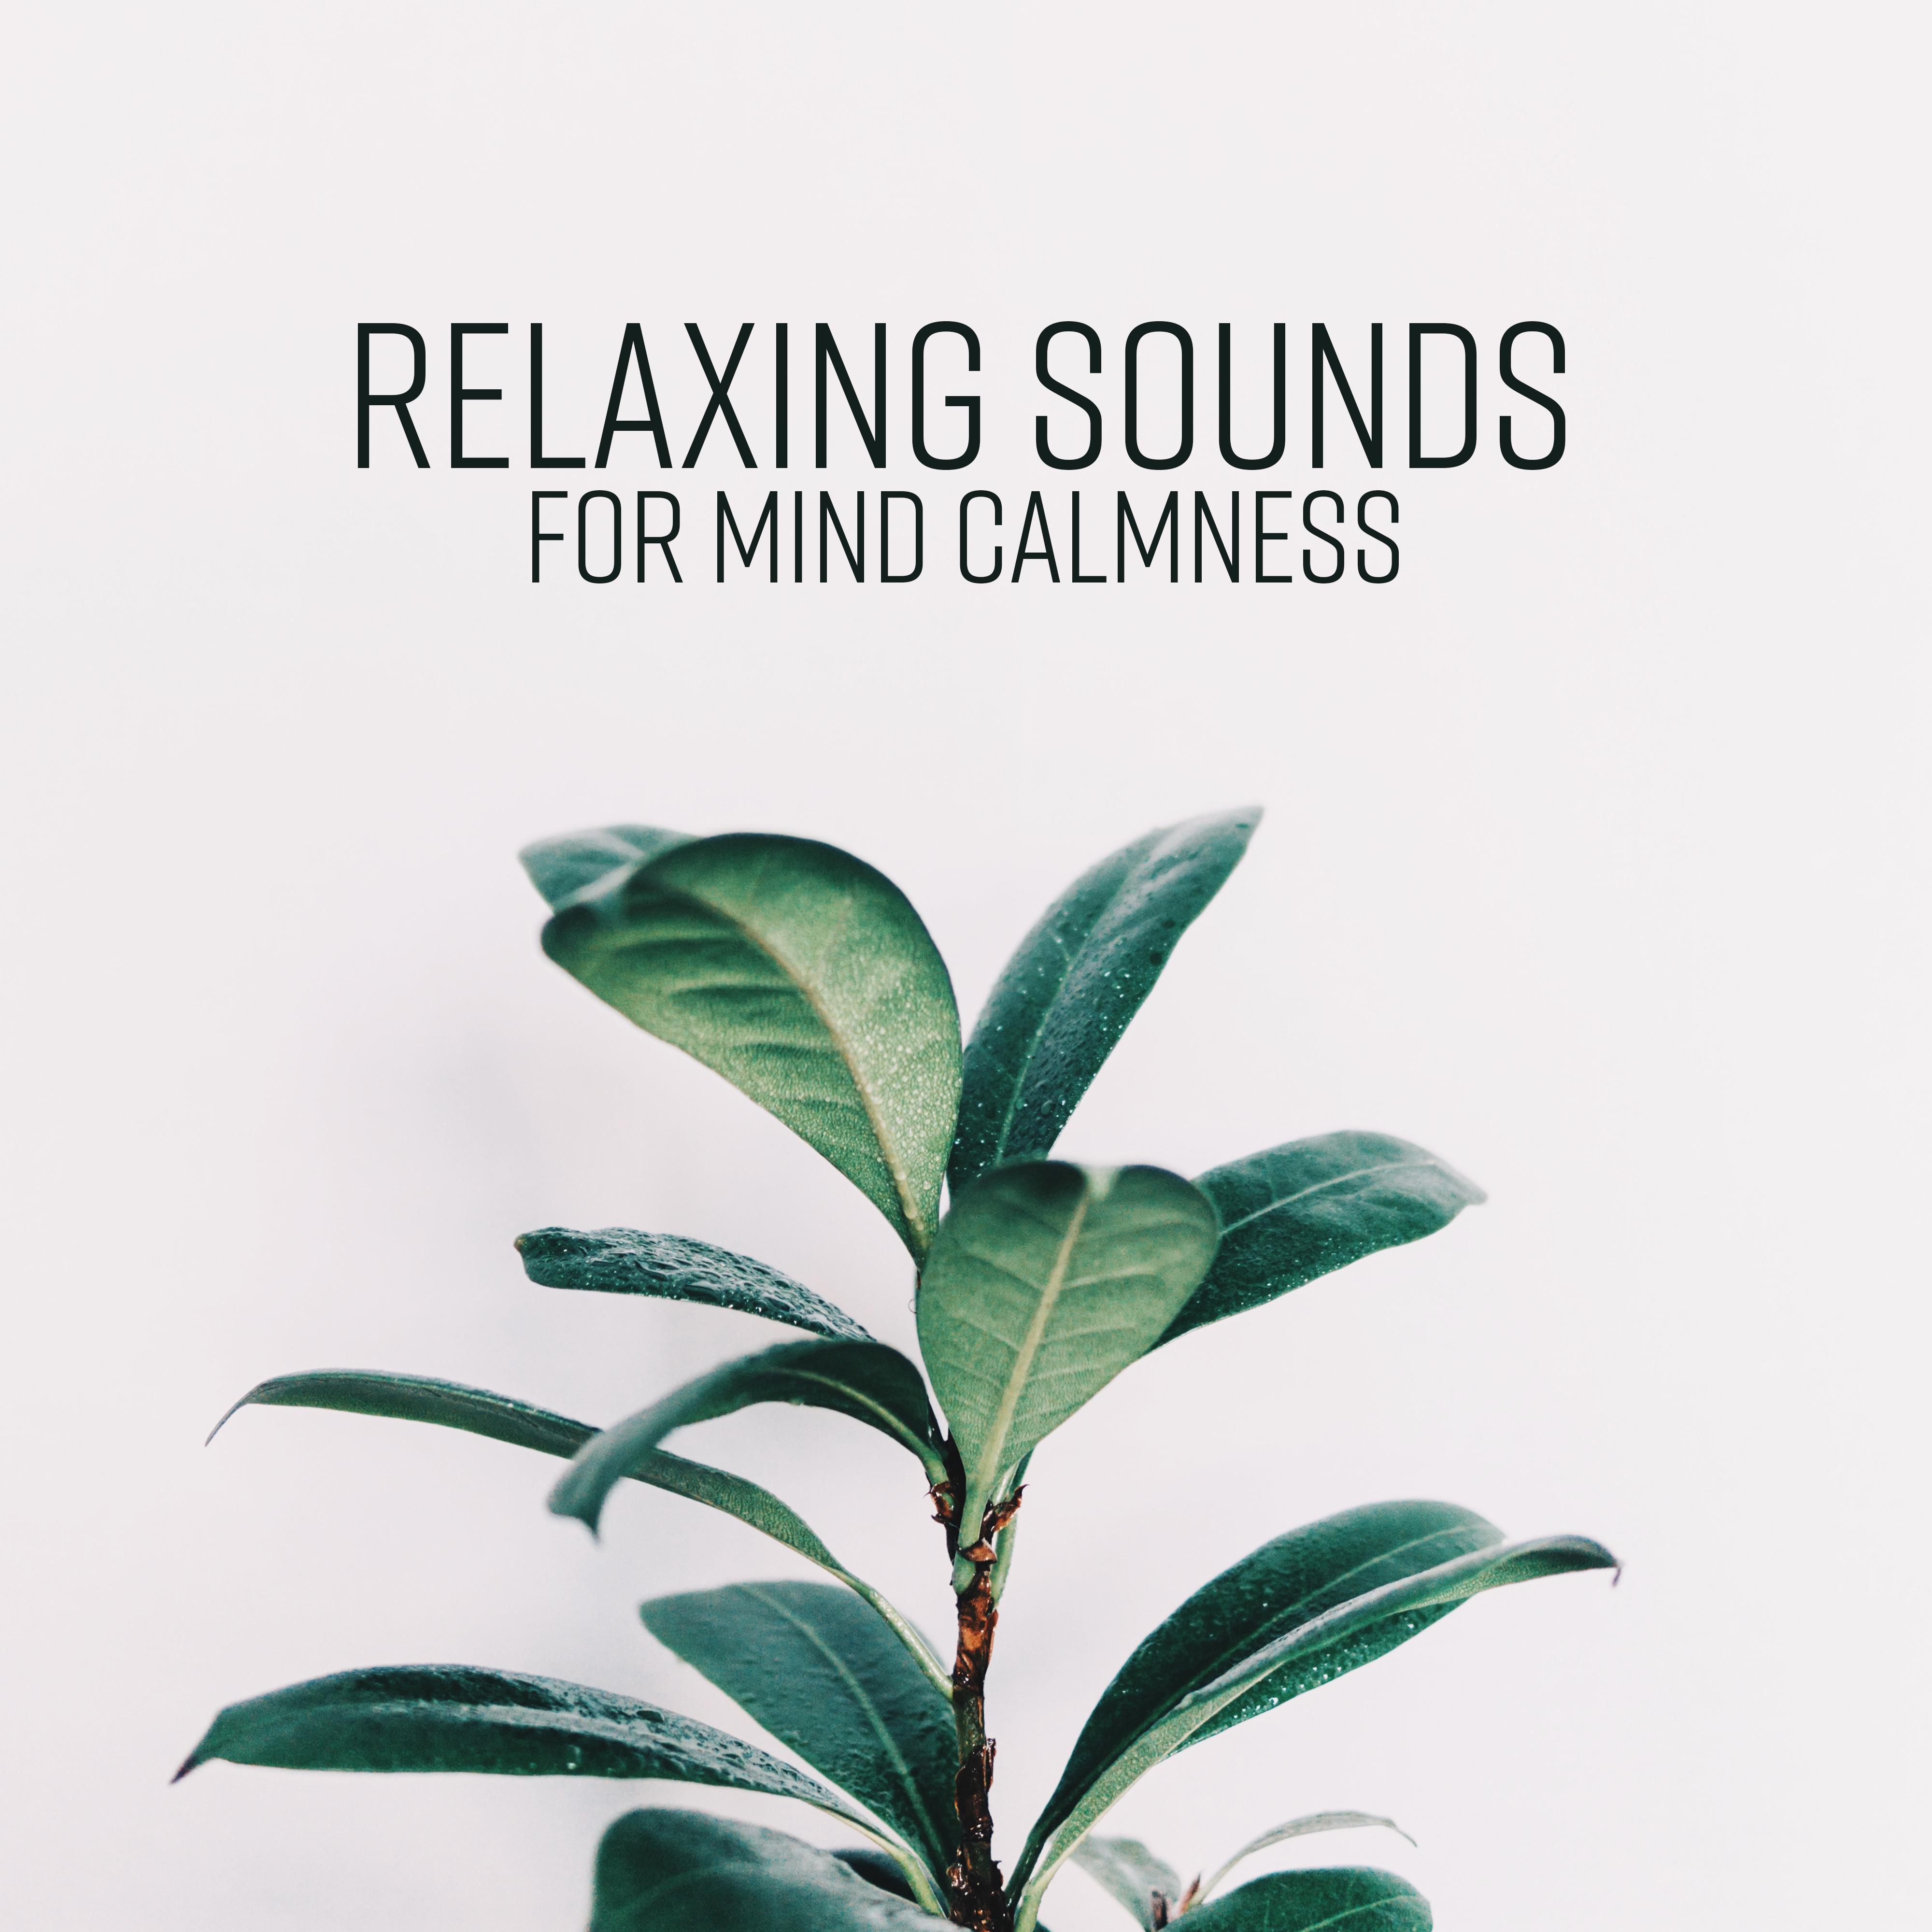 Relaxing Sounds for Mind Calmness